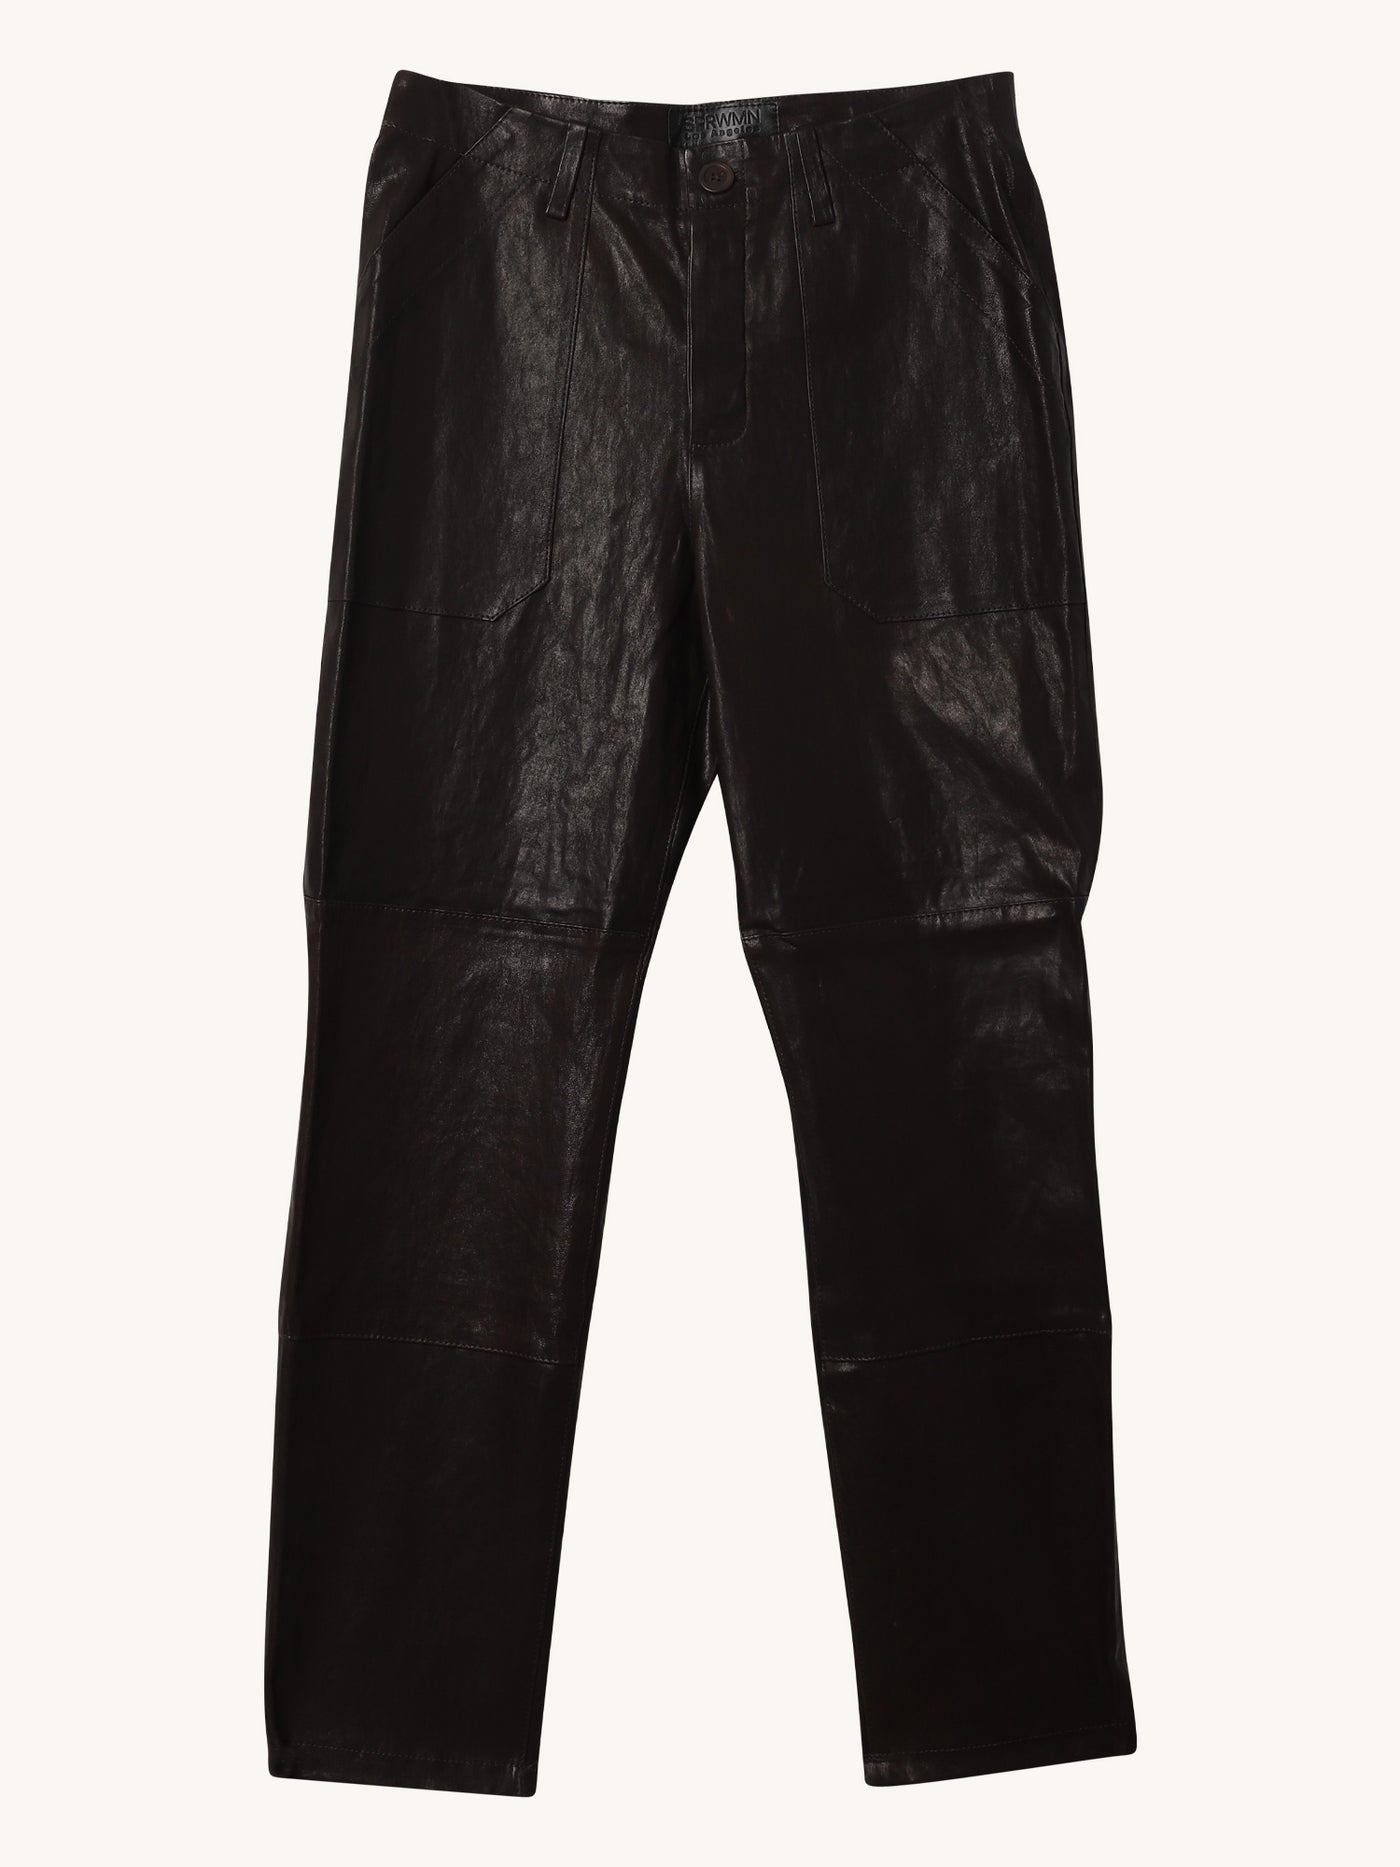 Leather Trouser Pant in Coal